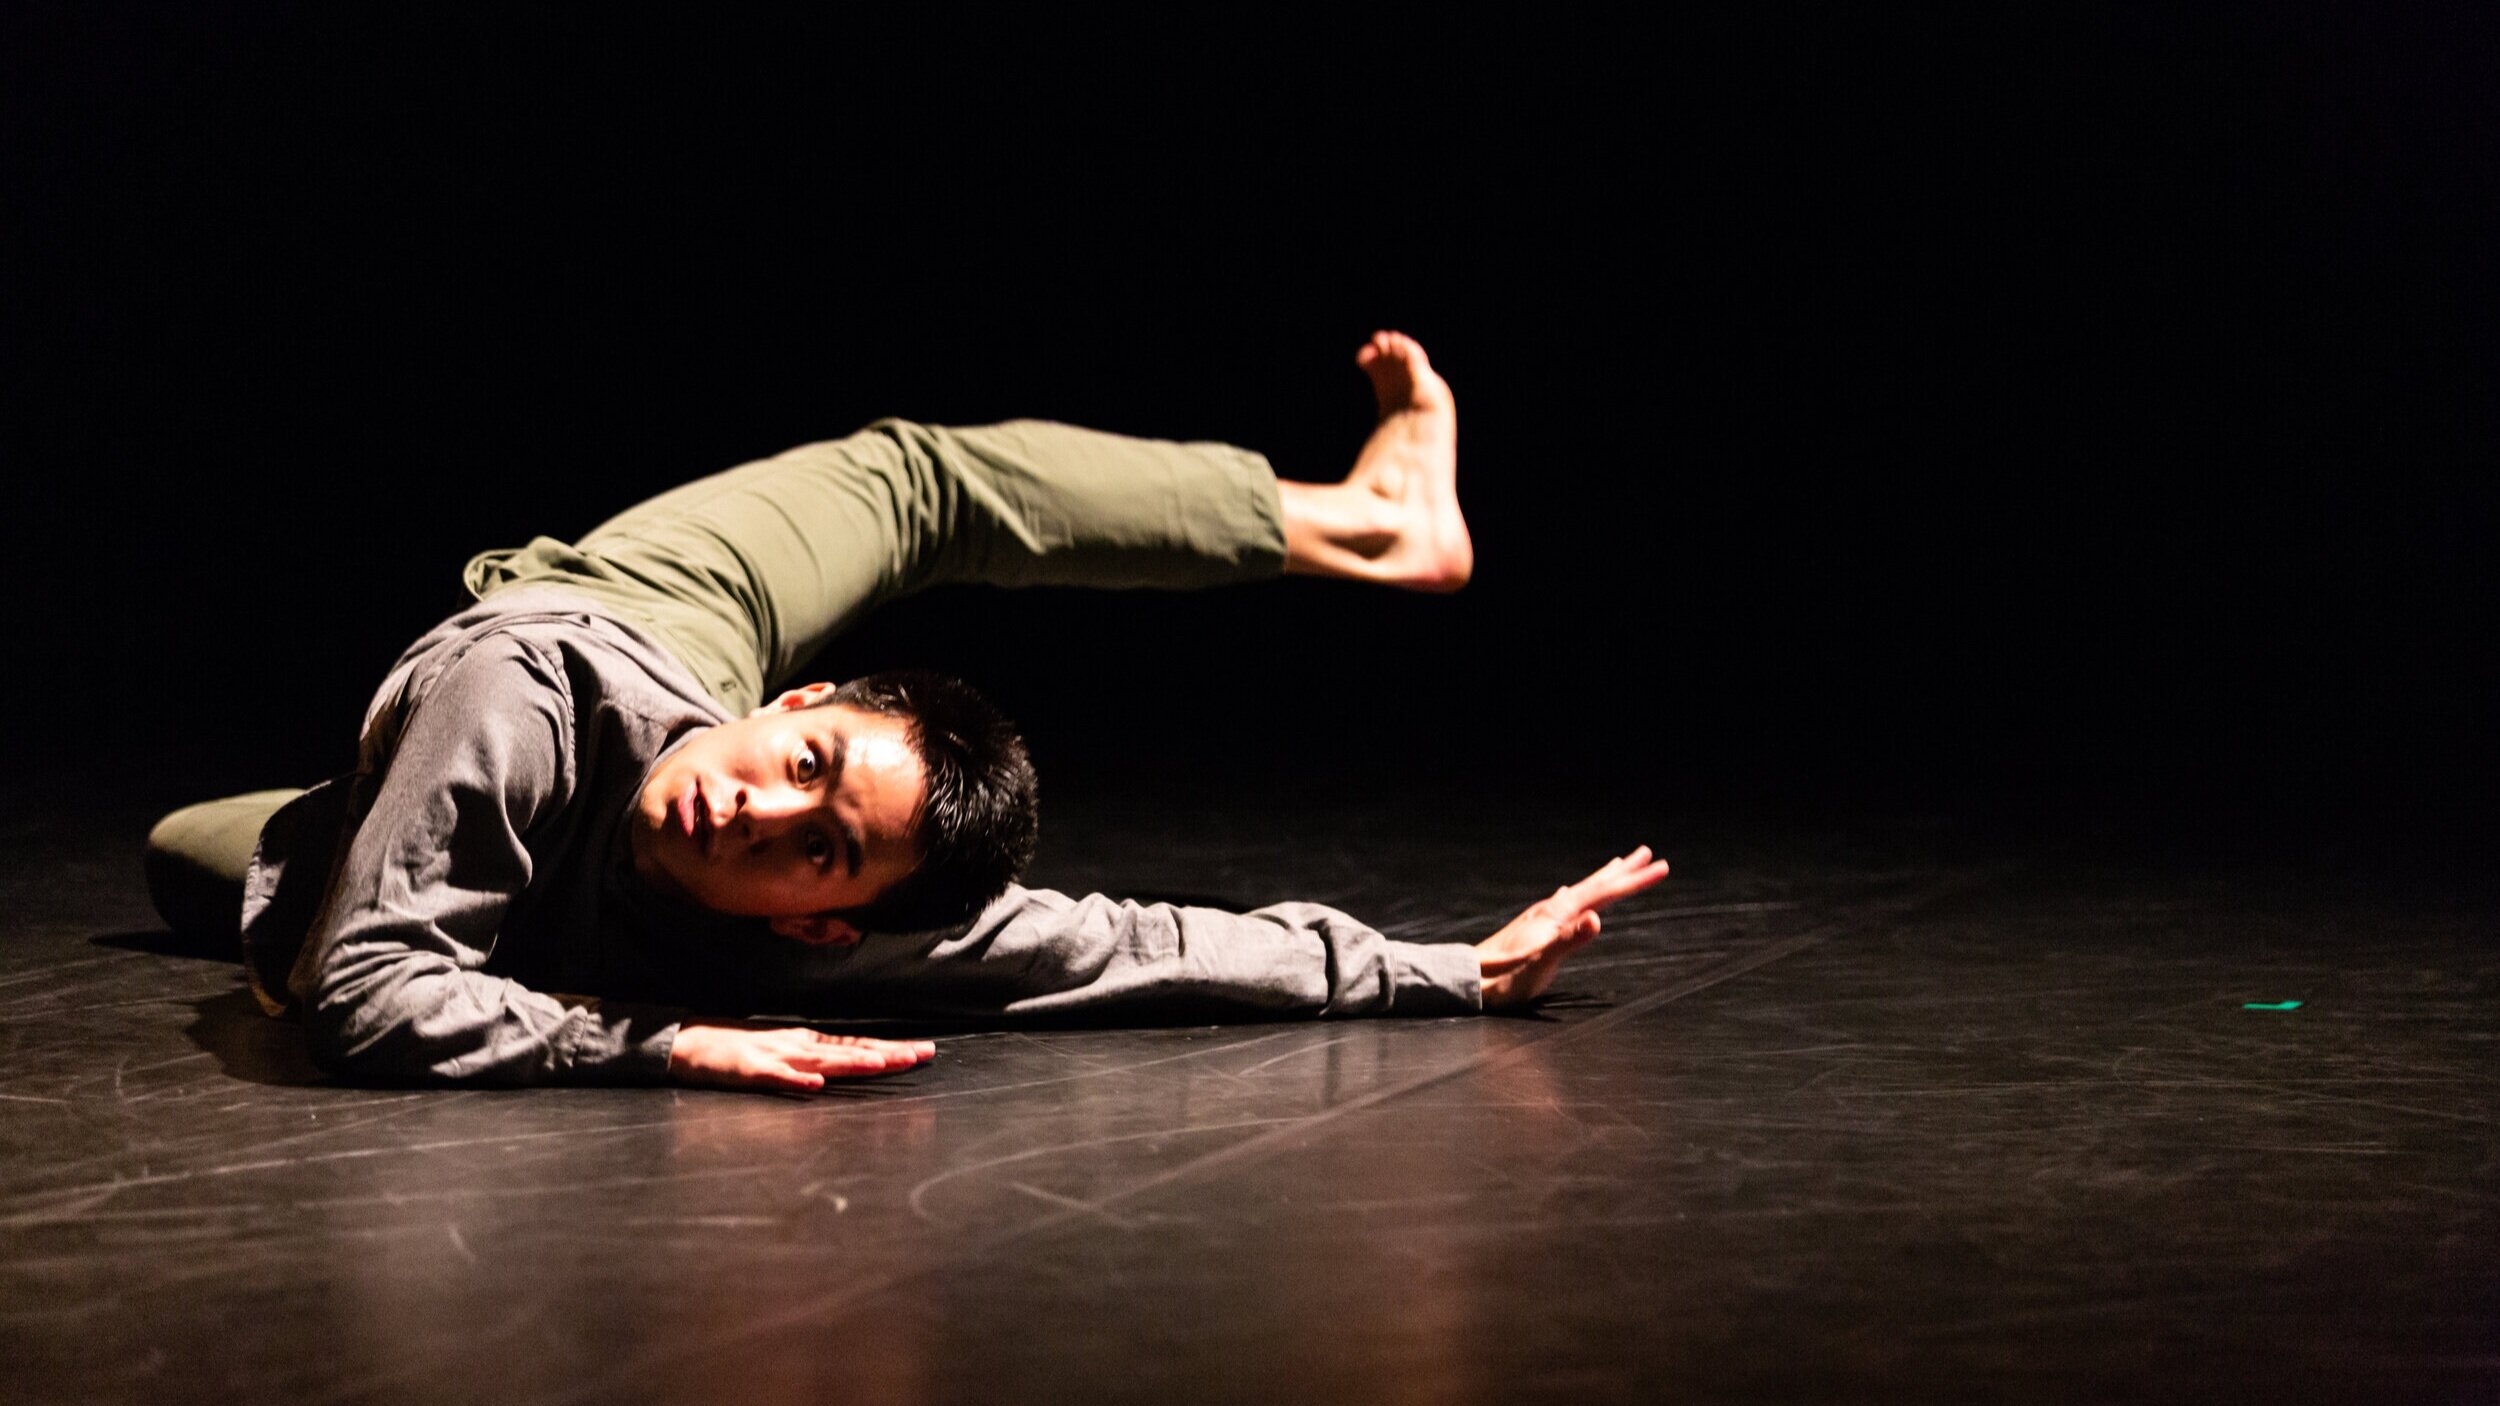  M1 Contact Contemporary Dance Festival / photo: Kuang Jingkai - Kinetic Expressions 